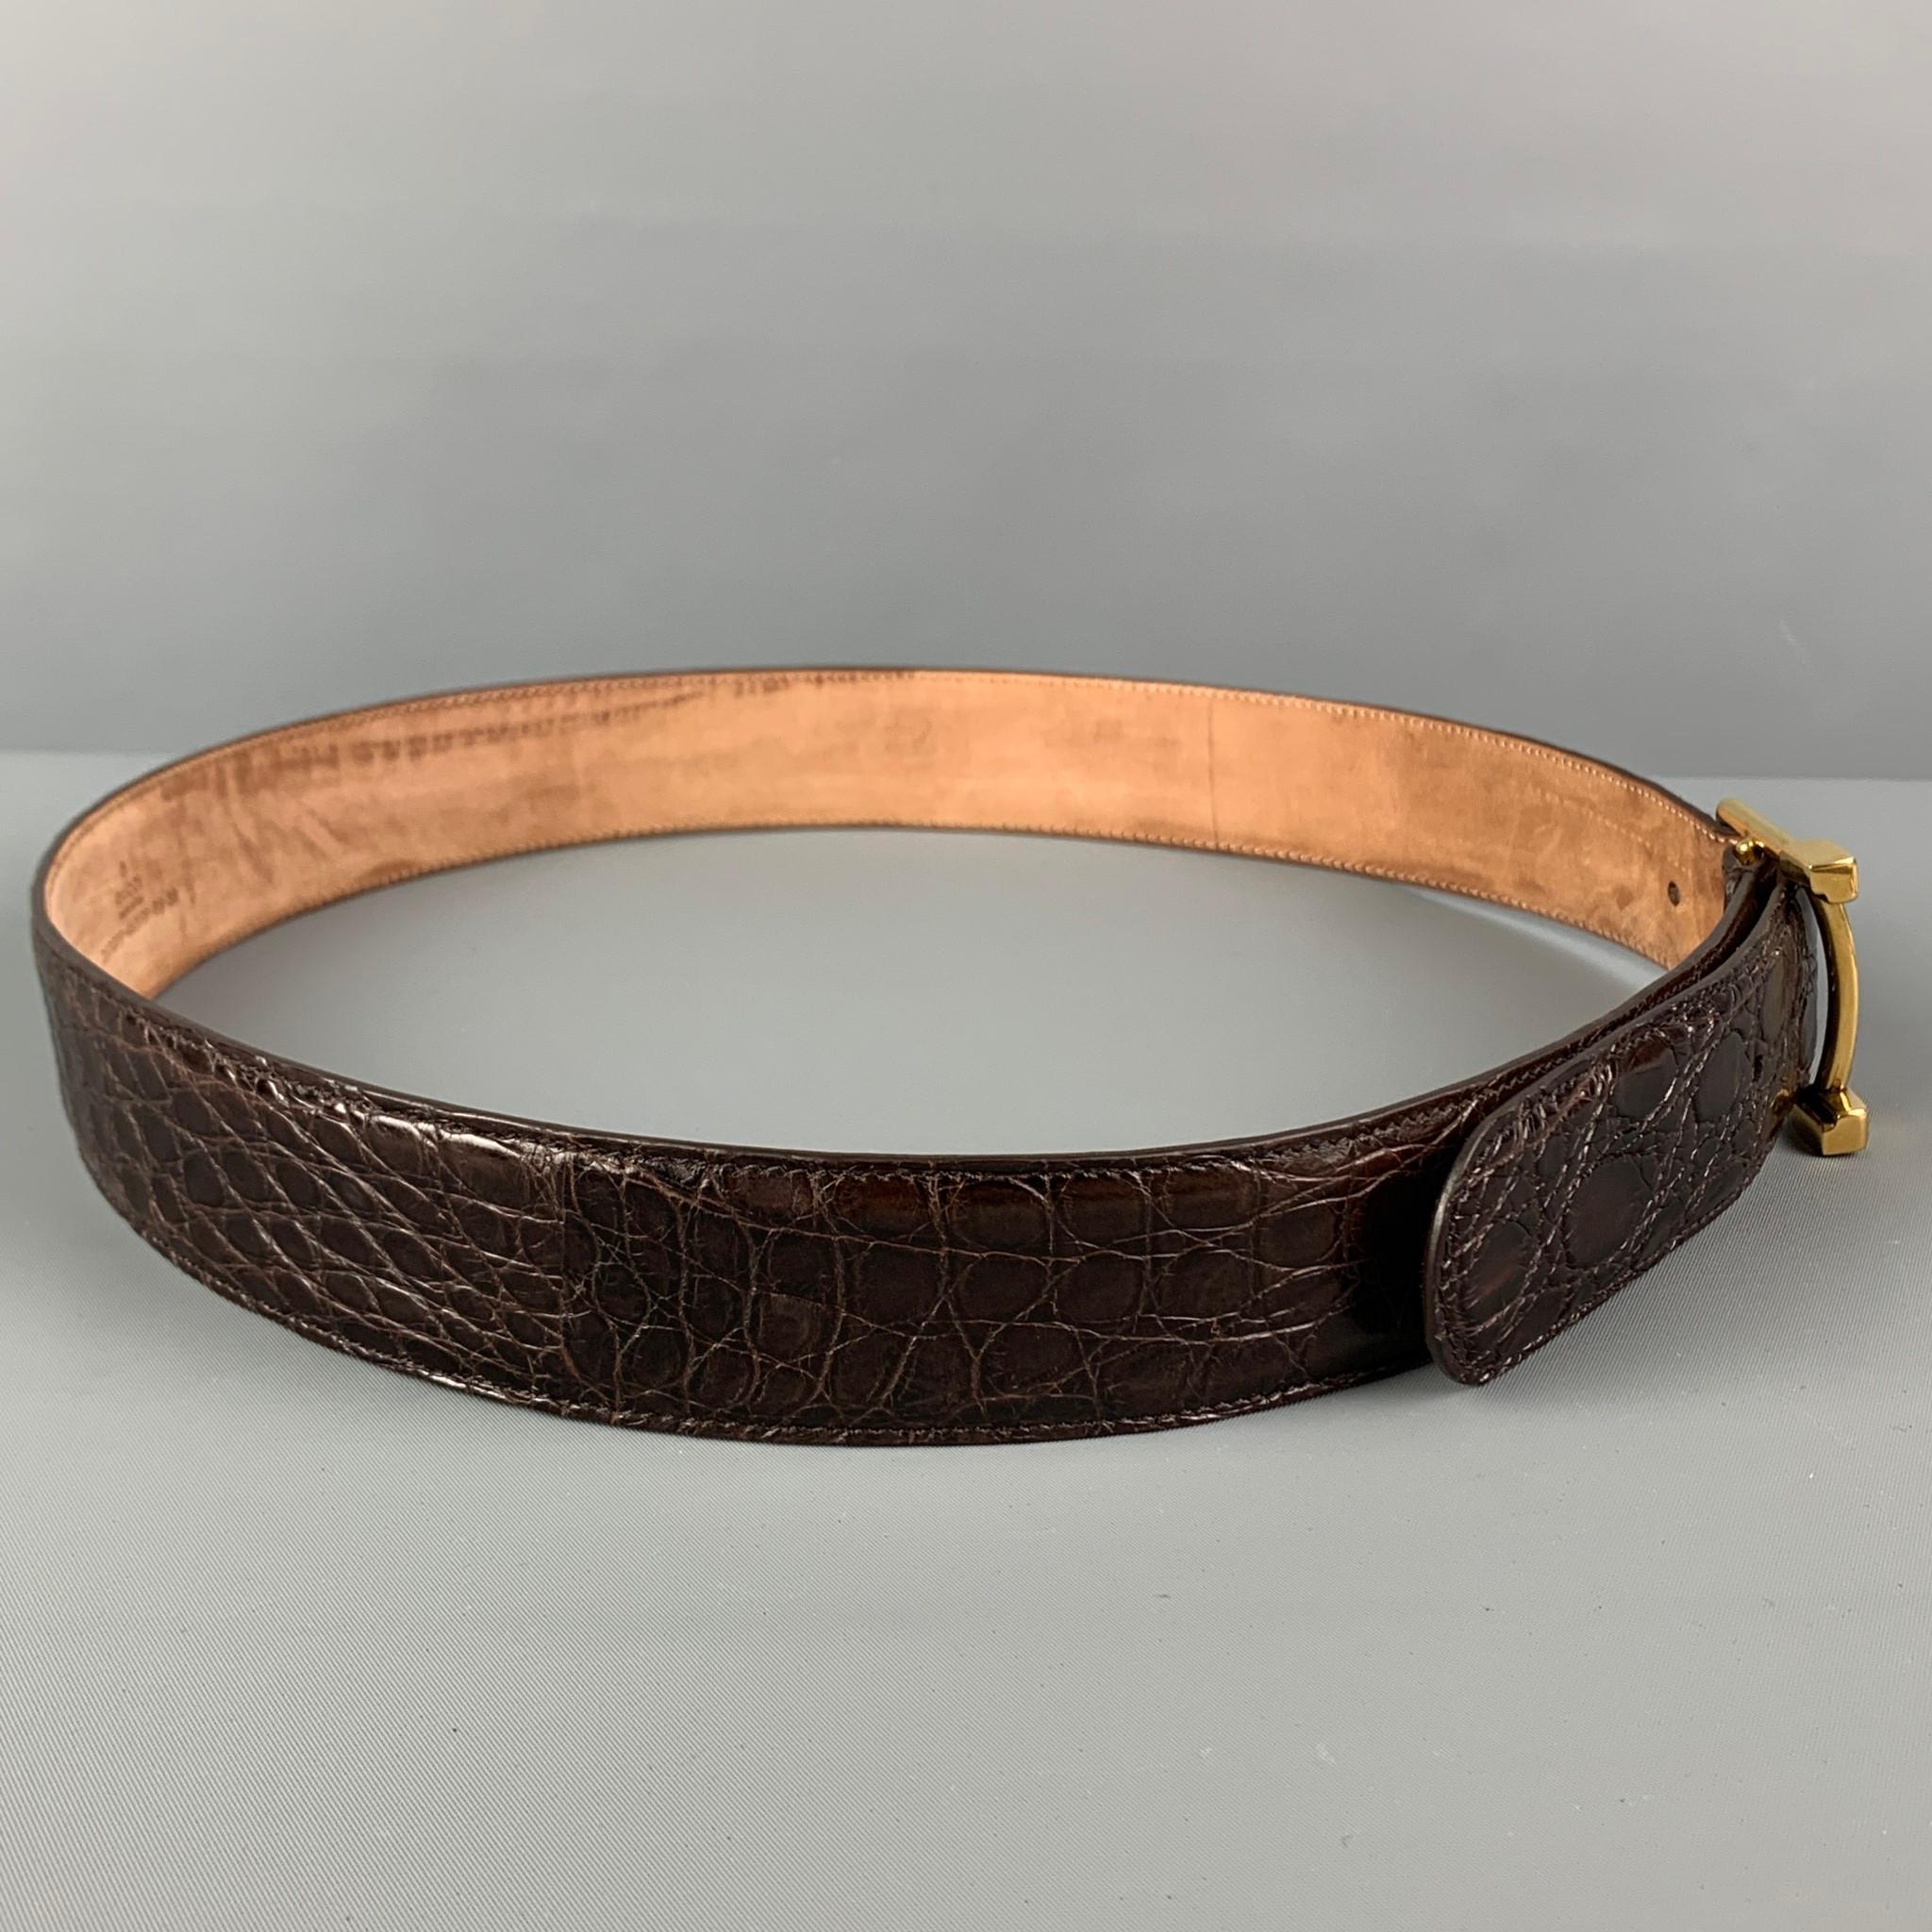 GUCCI belt comes in a brown embossed leather featuring a gold tone buckle closure. Made in Italy. 

Very Good Pre-Owned Condition.
Marked: 527319-480199-95-38

Length: 43.5 in.
Width: 1.5 in.
Fits: 36 in. - 40 in.
Buckle: 2 in. 